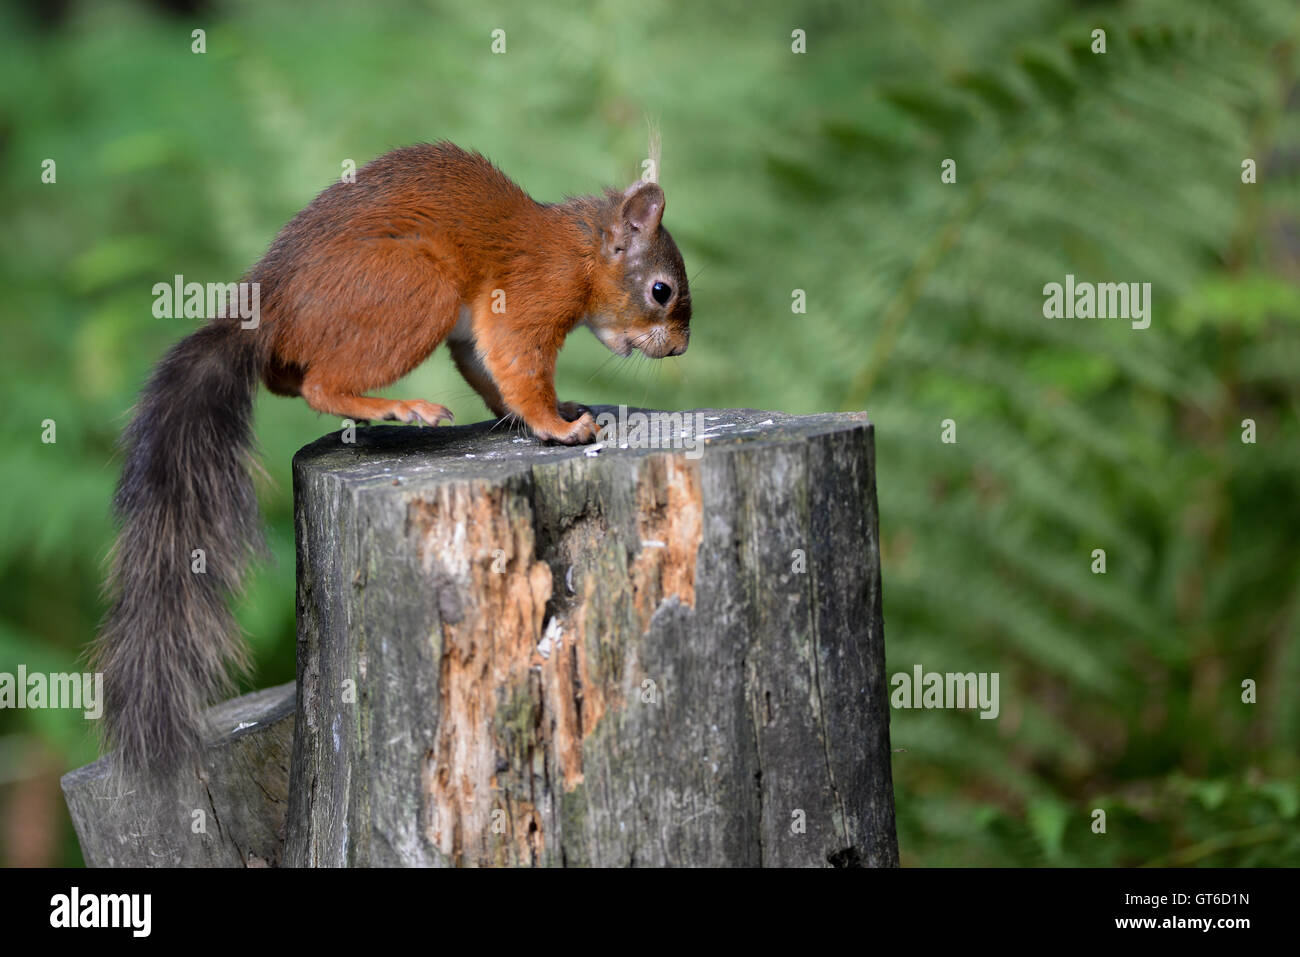 red squirrel, tuft, wild, animal, forest, nature, tree, creature, fluffy, eurasian, furry, nut, beauty, outdoor, funny, wood, ea Stock Photo